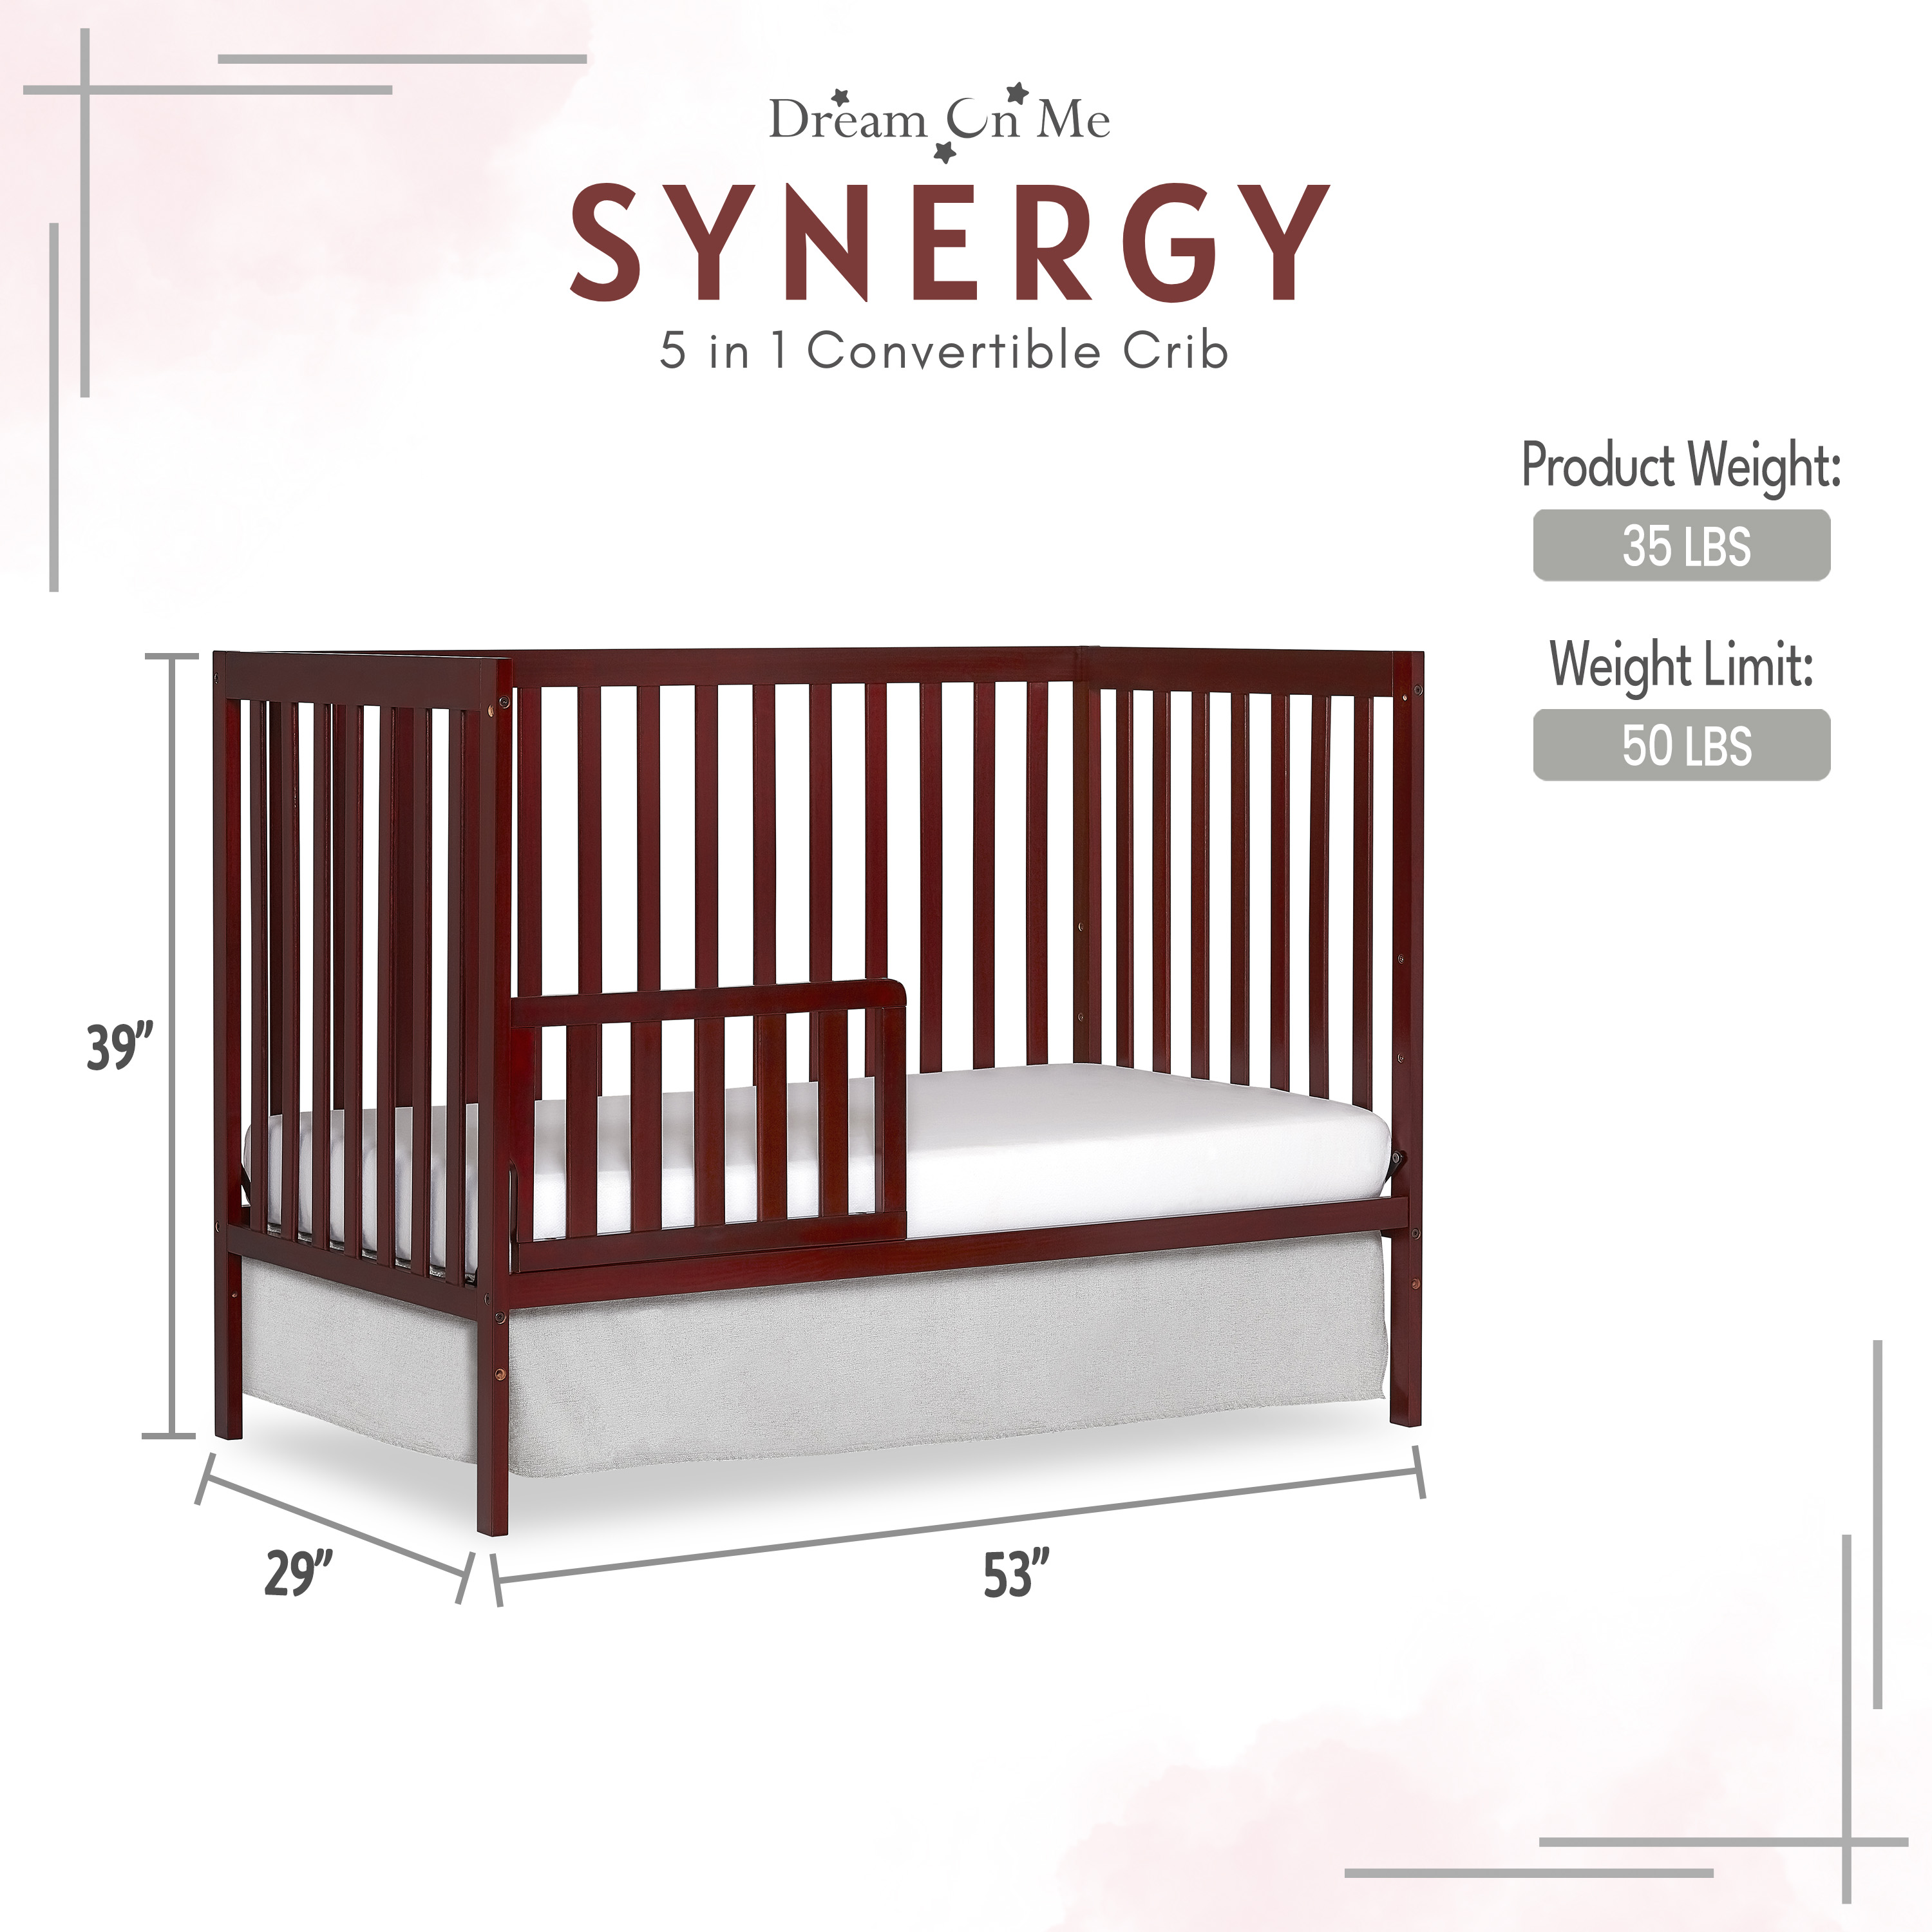 Dream On Me Synergy 5-in-1 Convertible Crib in Cherry, Greenguard Gold Certified - image 4 of 12